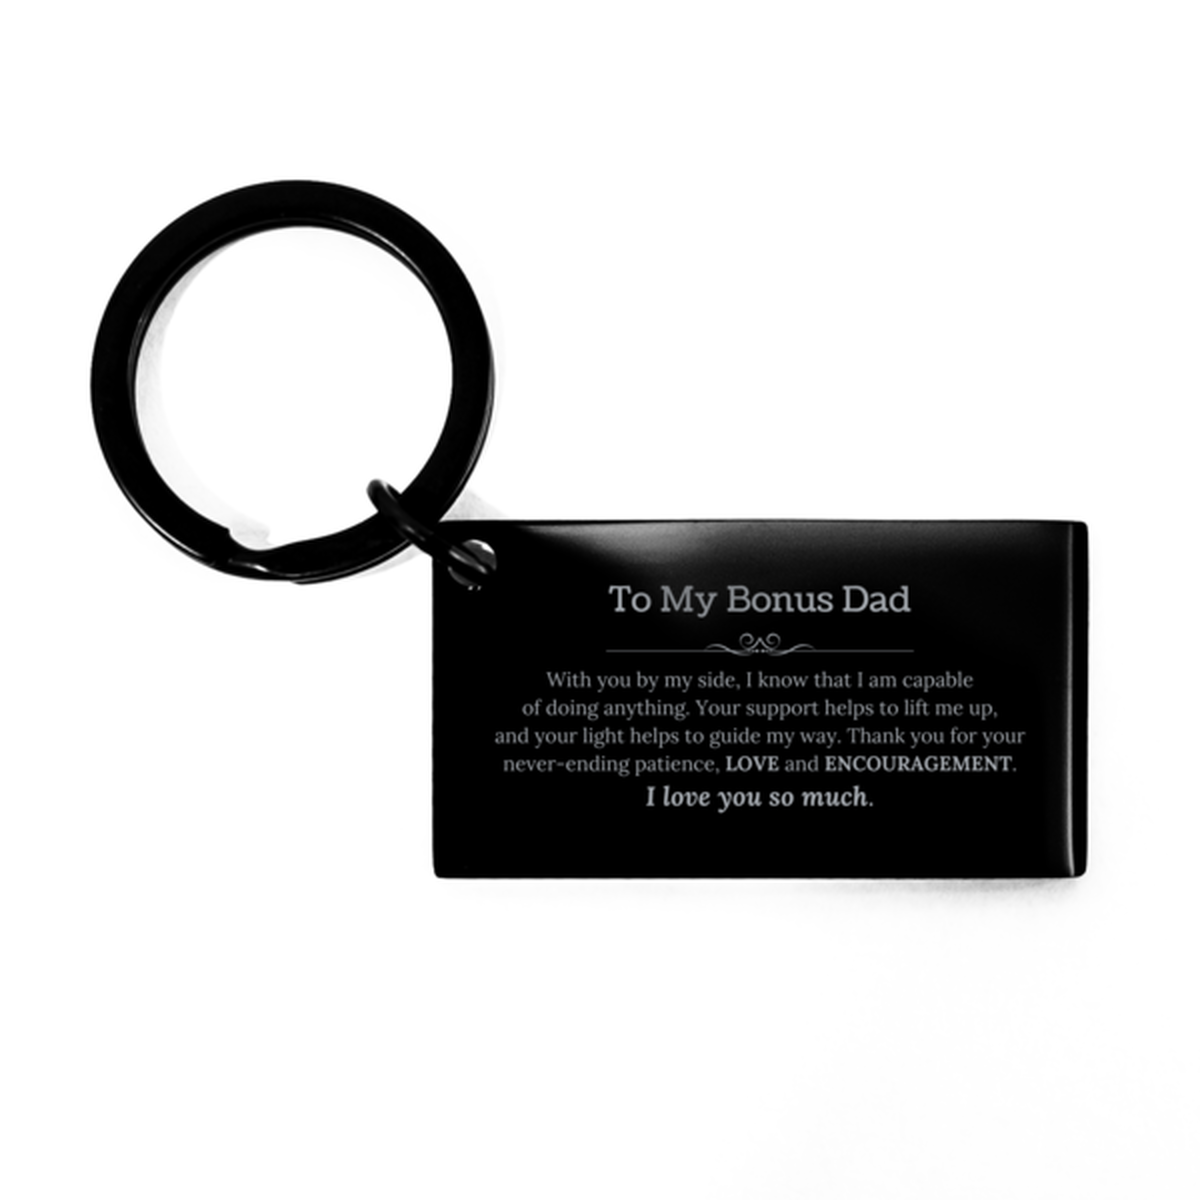 Appreciation Bonus Dad Keychain Gifts, To My Bonus Dad Birthday Christmas Wedding Keepsake Gifts for Bonus Dad With you by my side, I know that I am capable of doing anything. I love you so much